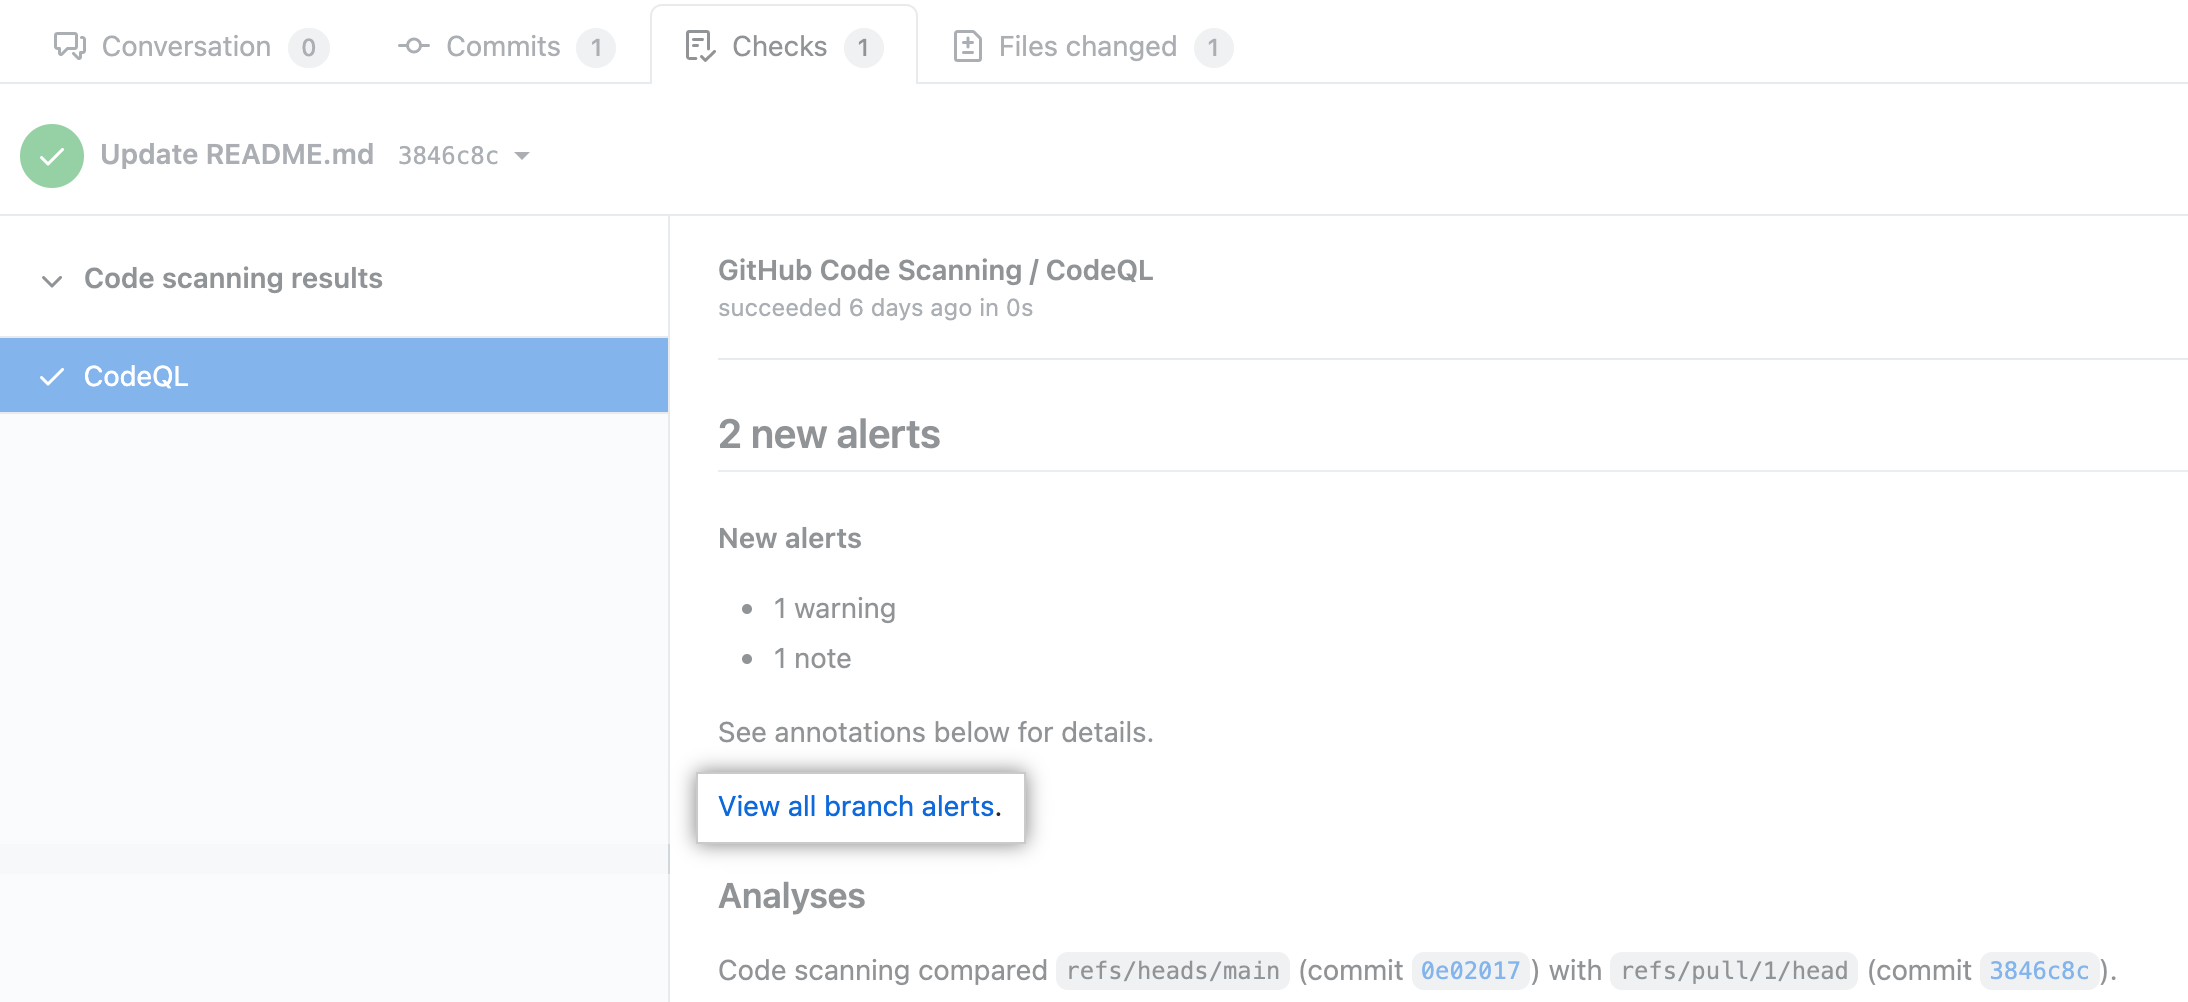 Screenshot of the Code scanning results check on a pull request. The "View all branch alerts" link is emphasised.